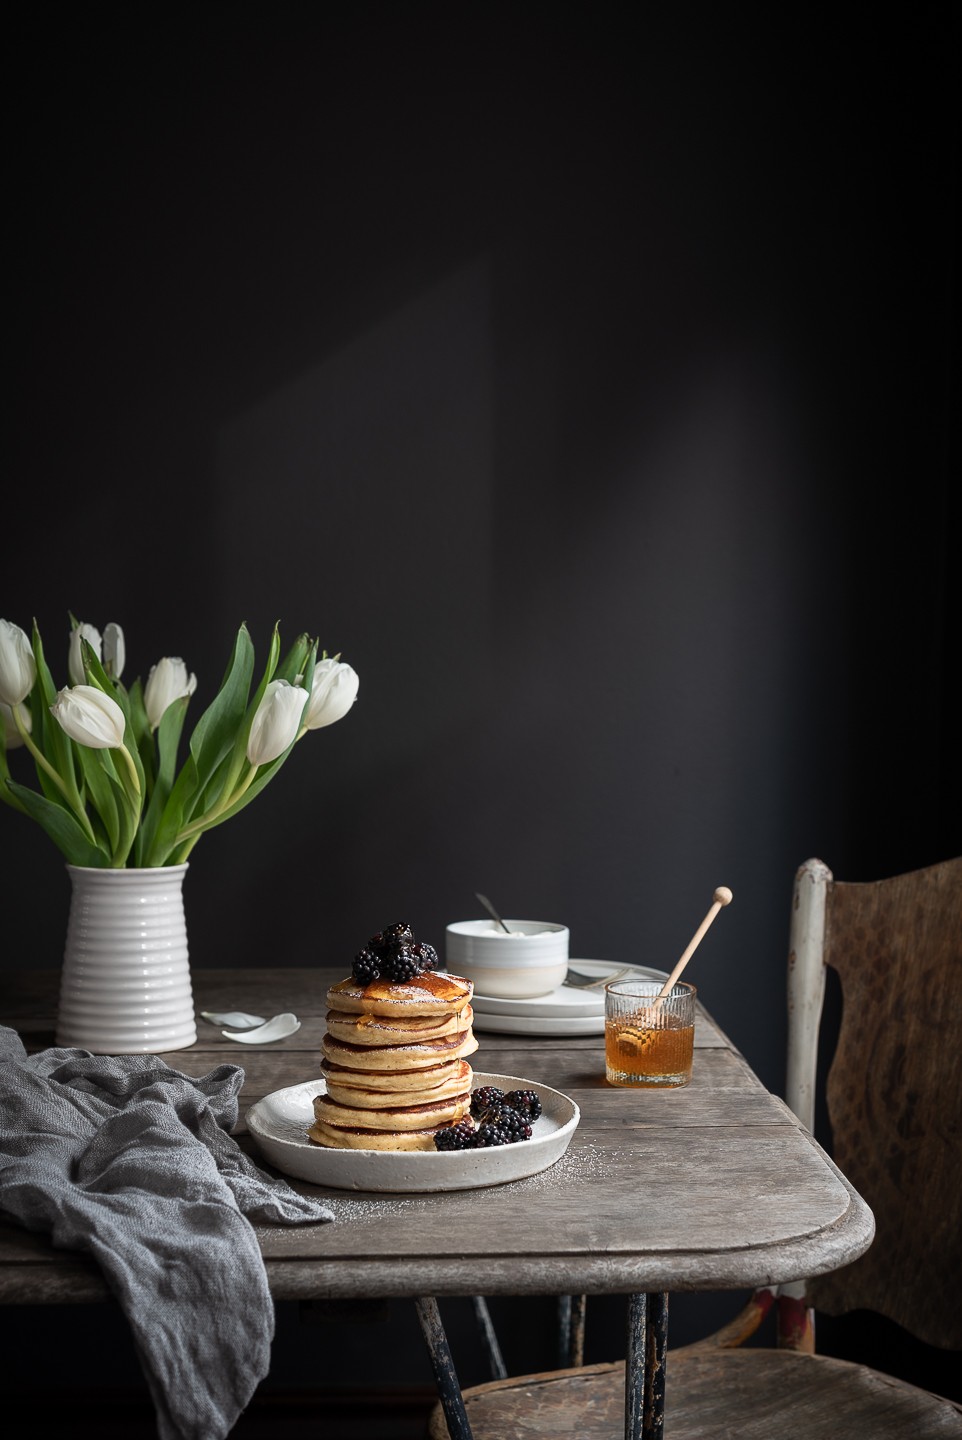 The fluffiest Ricotta pancakes